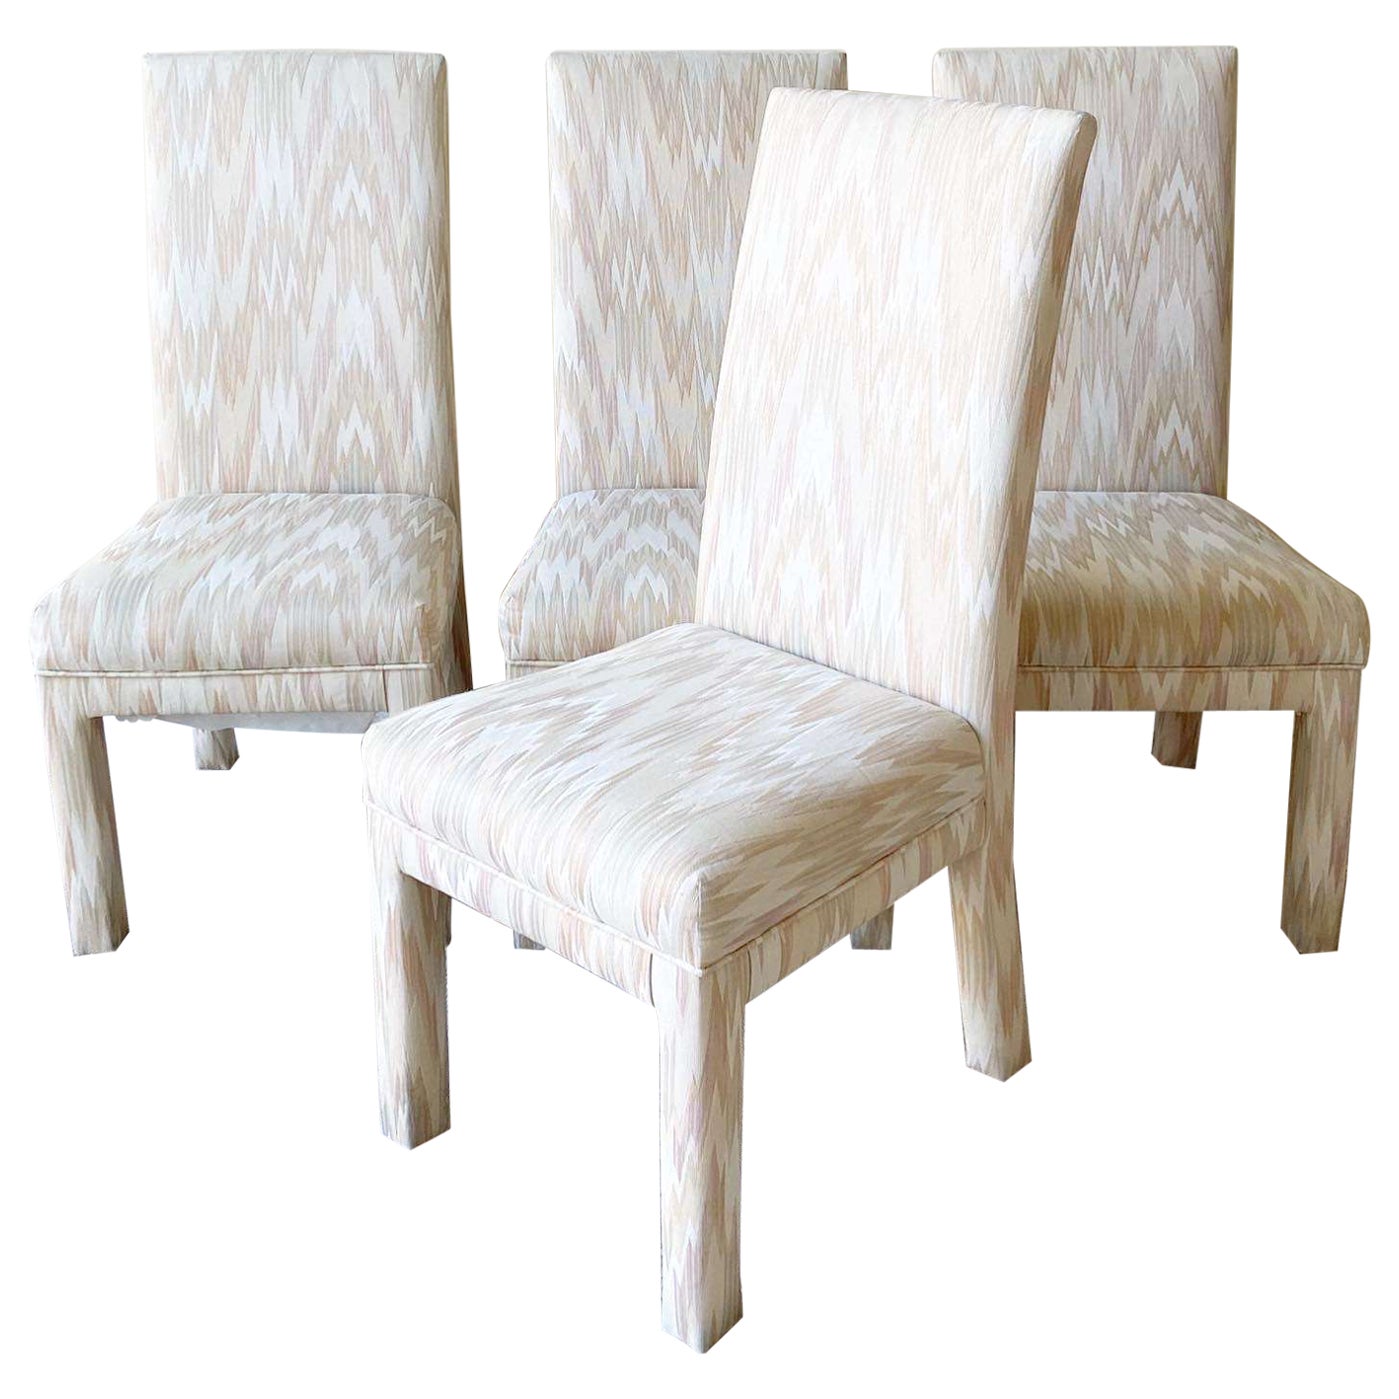 Postmodern Brown, Tan and Beige Parsons Dining Chairs - 4 Chairs